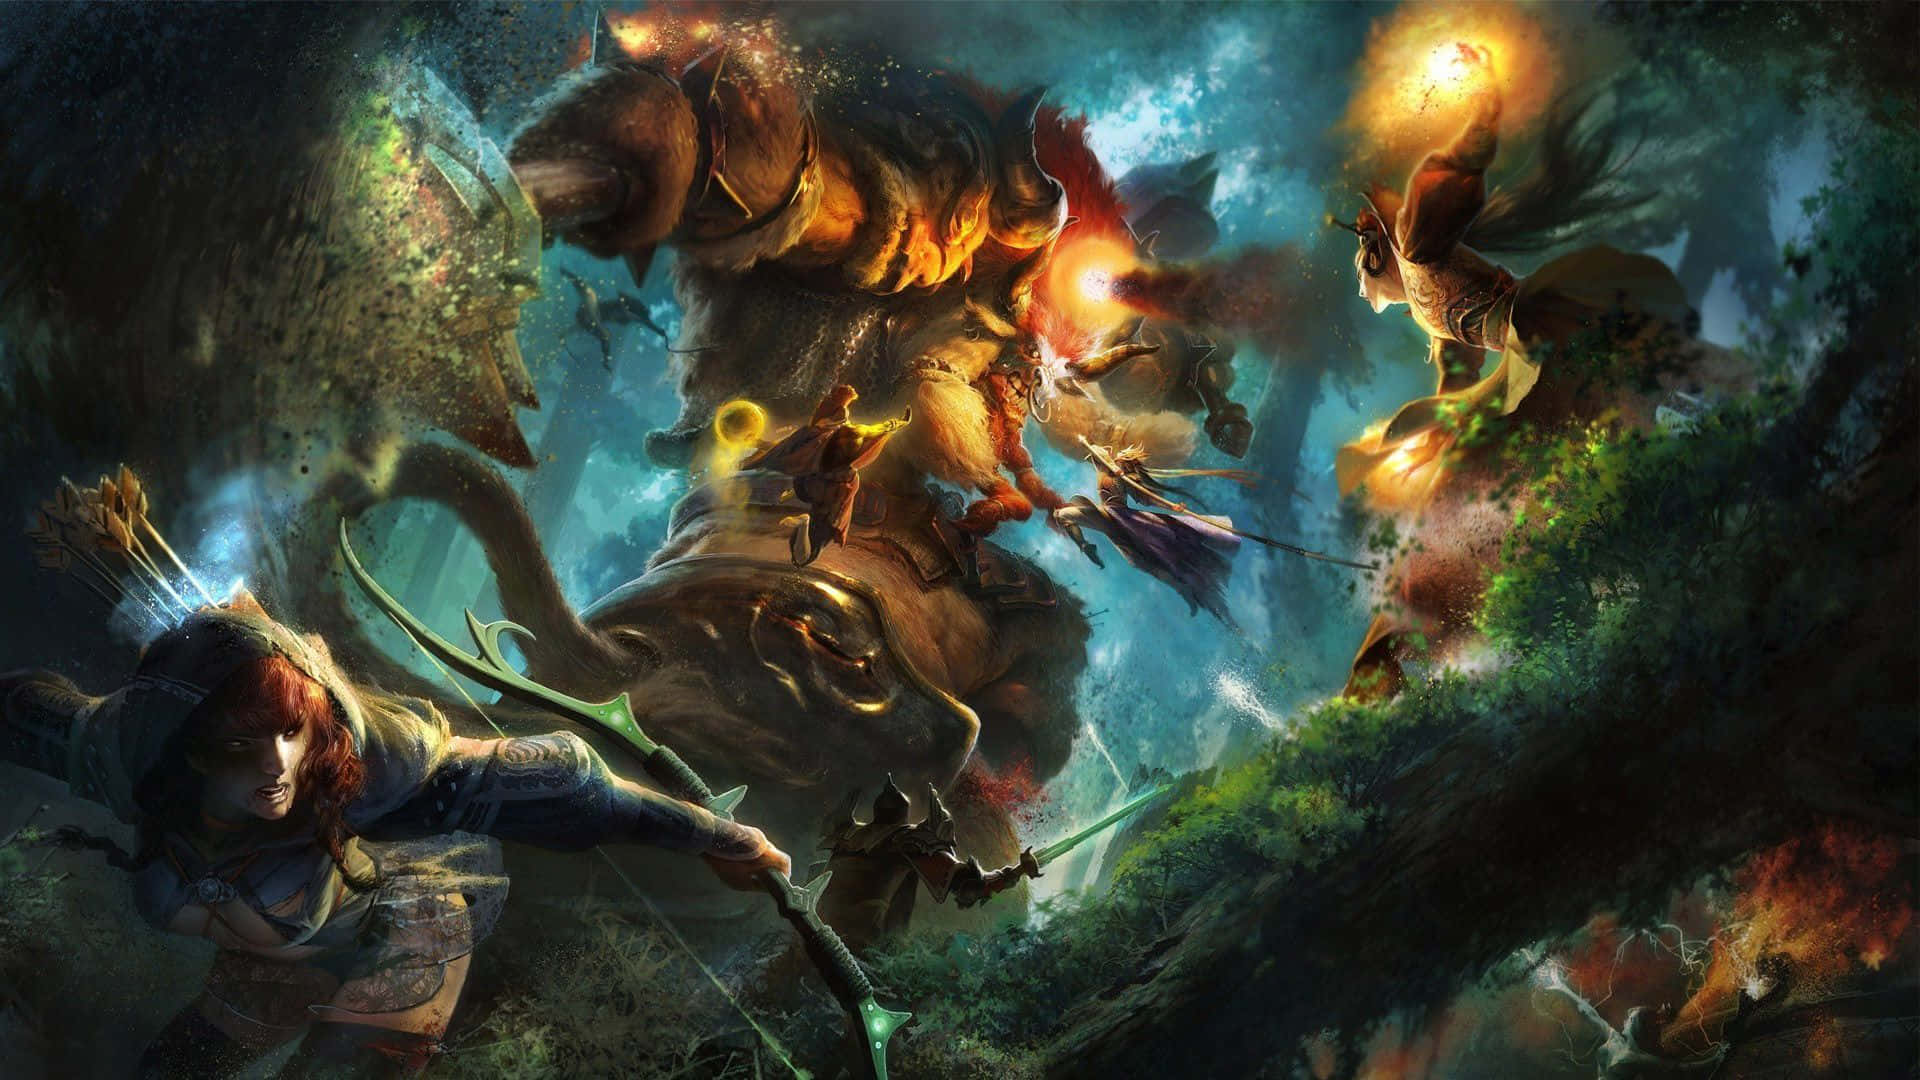 Heroes Compete in an Epic Battle in Valve's Popular Multiplayer Online Action Strategy Game, Dota 2 Wallpaper